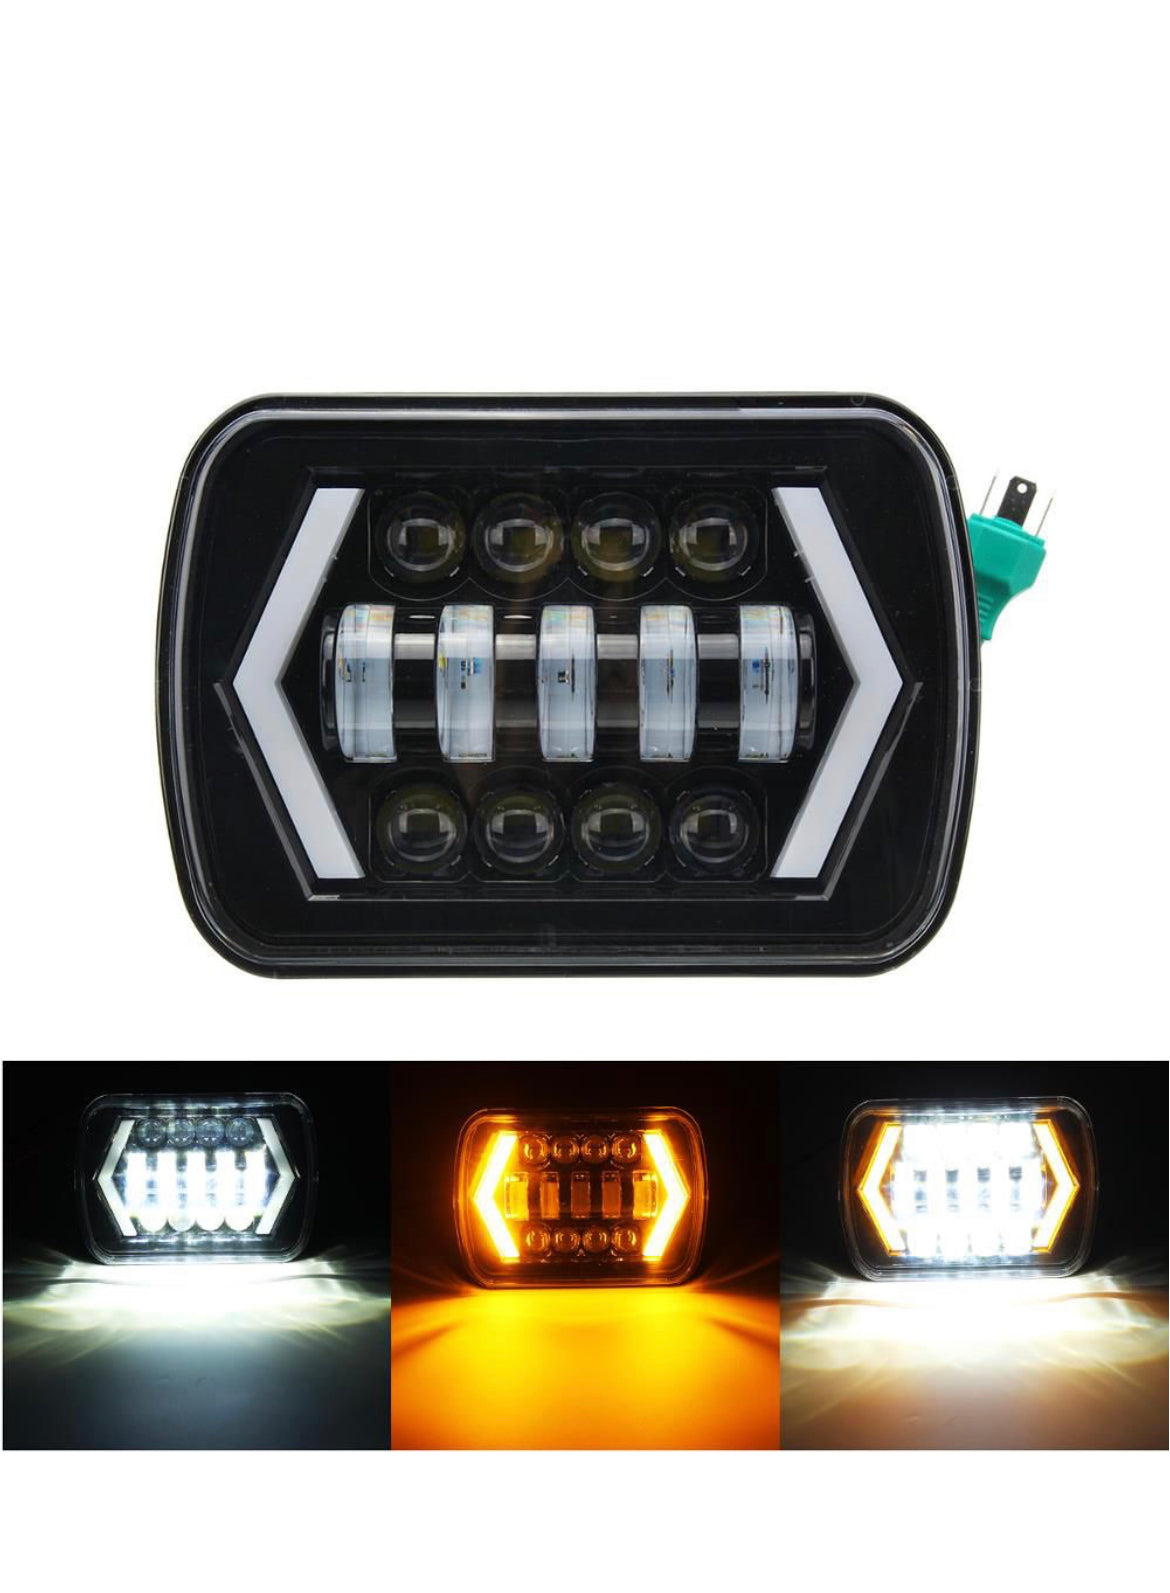 7” Square drl headlights ( jeep style )